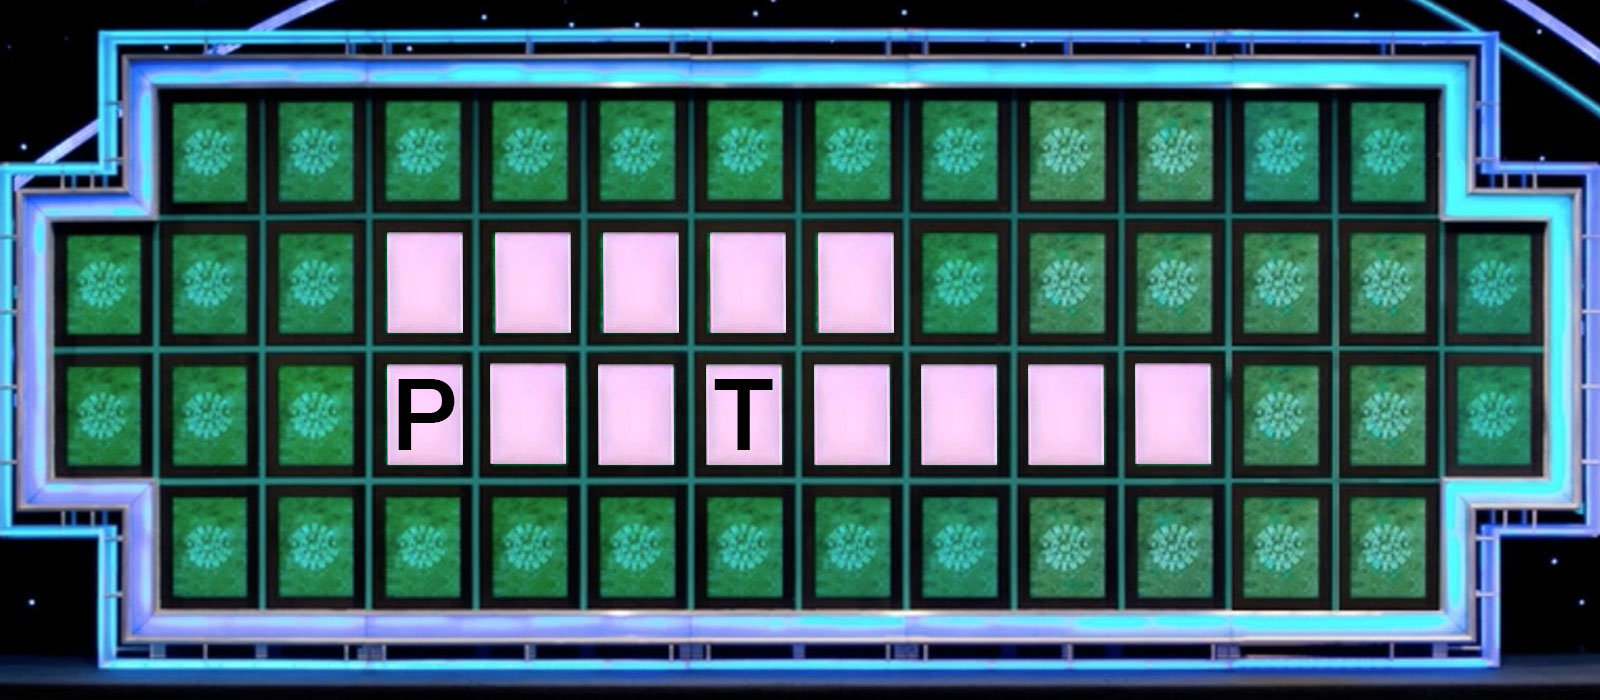 Can You Solve These Wheel of Fortune Puzzles? Quiz 1015